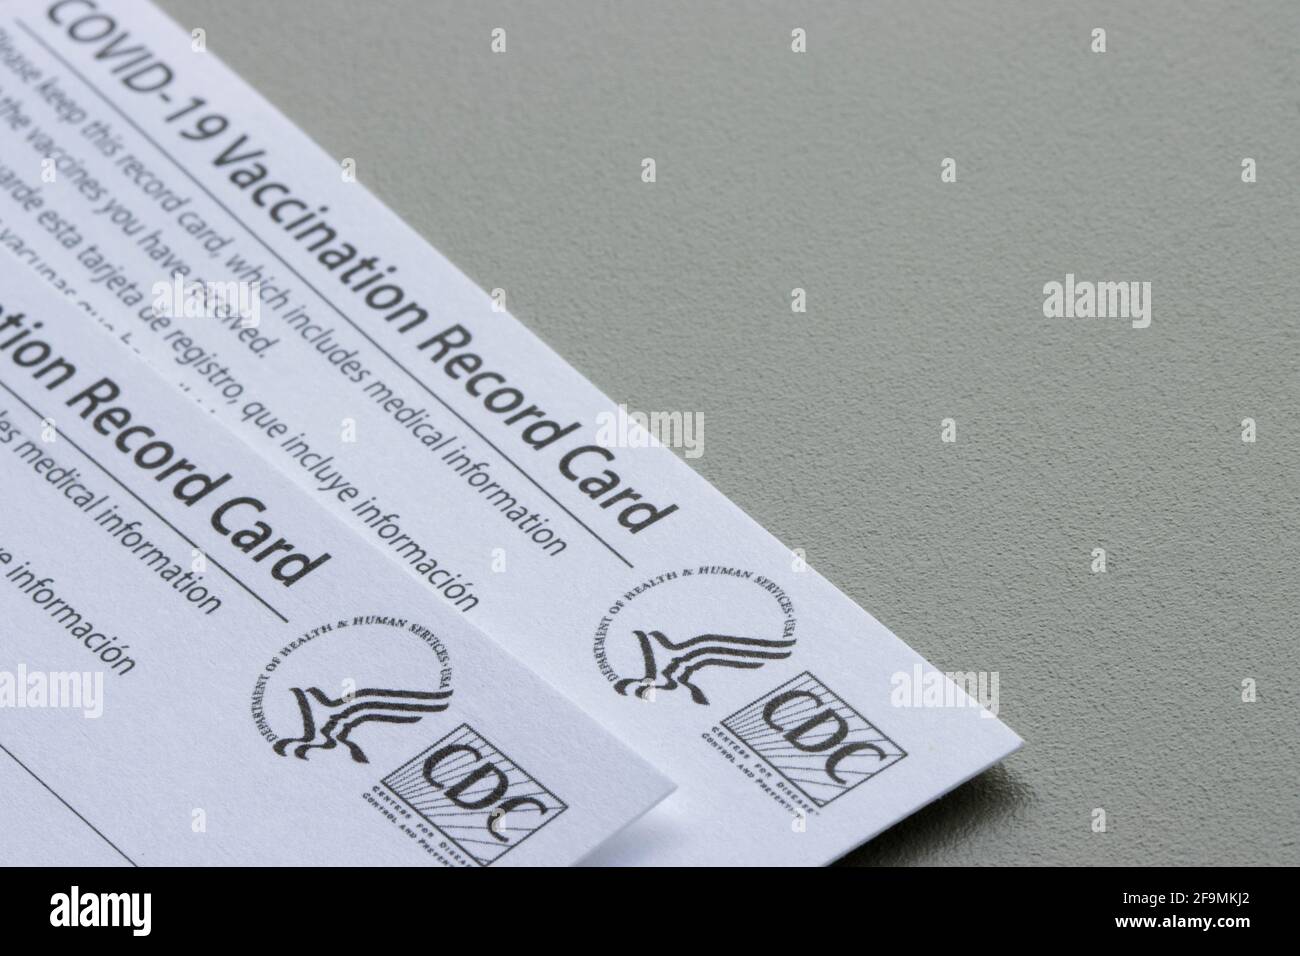 Covid-19 Vaccination record cards issued by CDC (United States Centers for Disease Control and Prevention) isolated on a gray background. Stock Photo